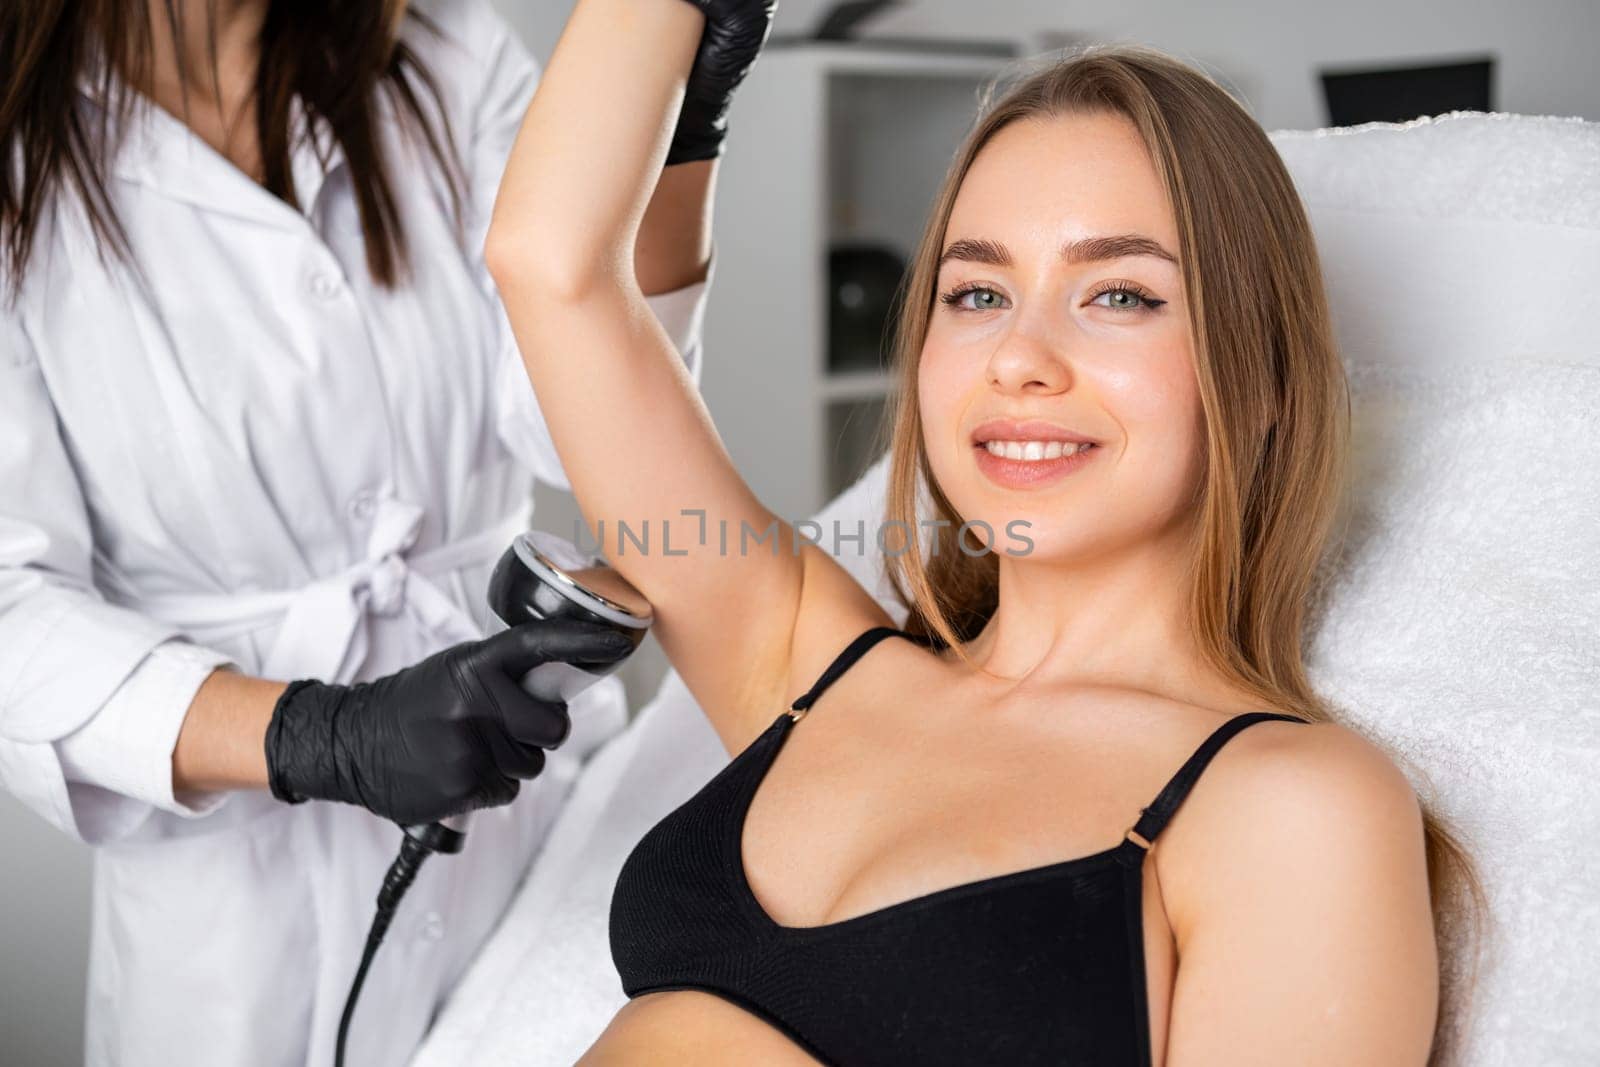 Portrait of a young blonde woman during ultrasound cavitation procedure in a beauty salon.